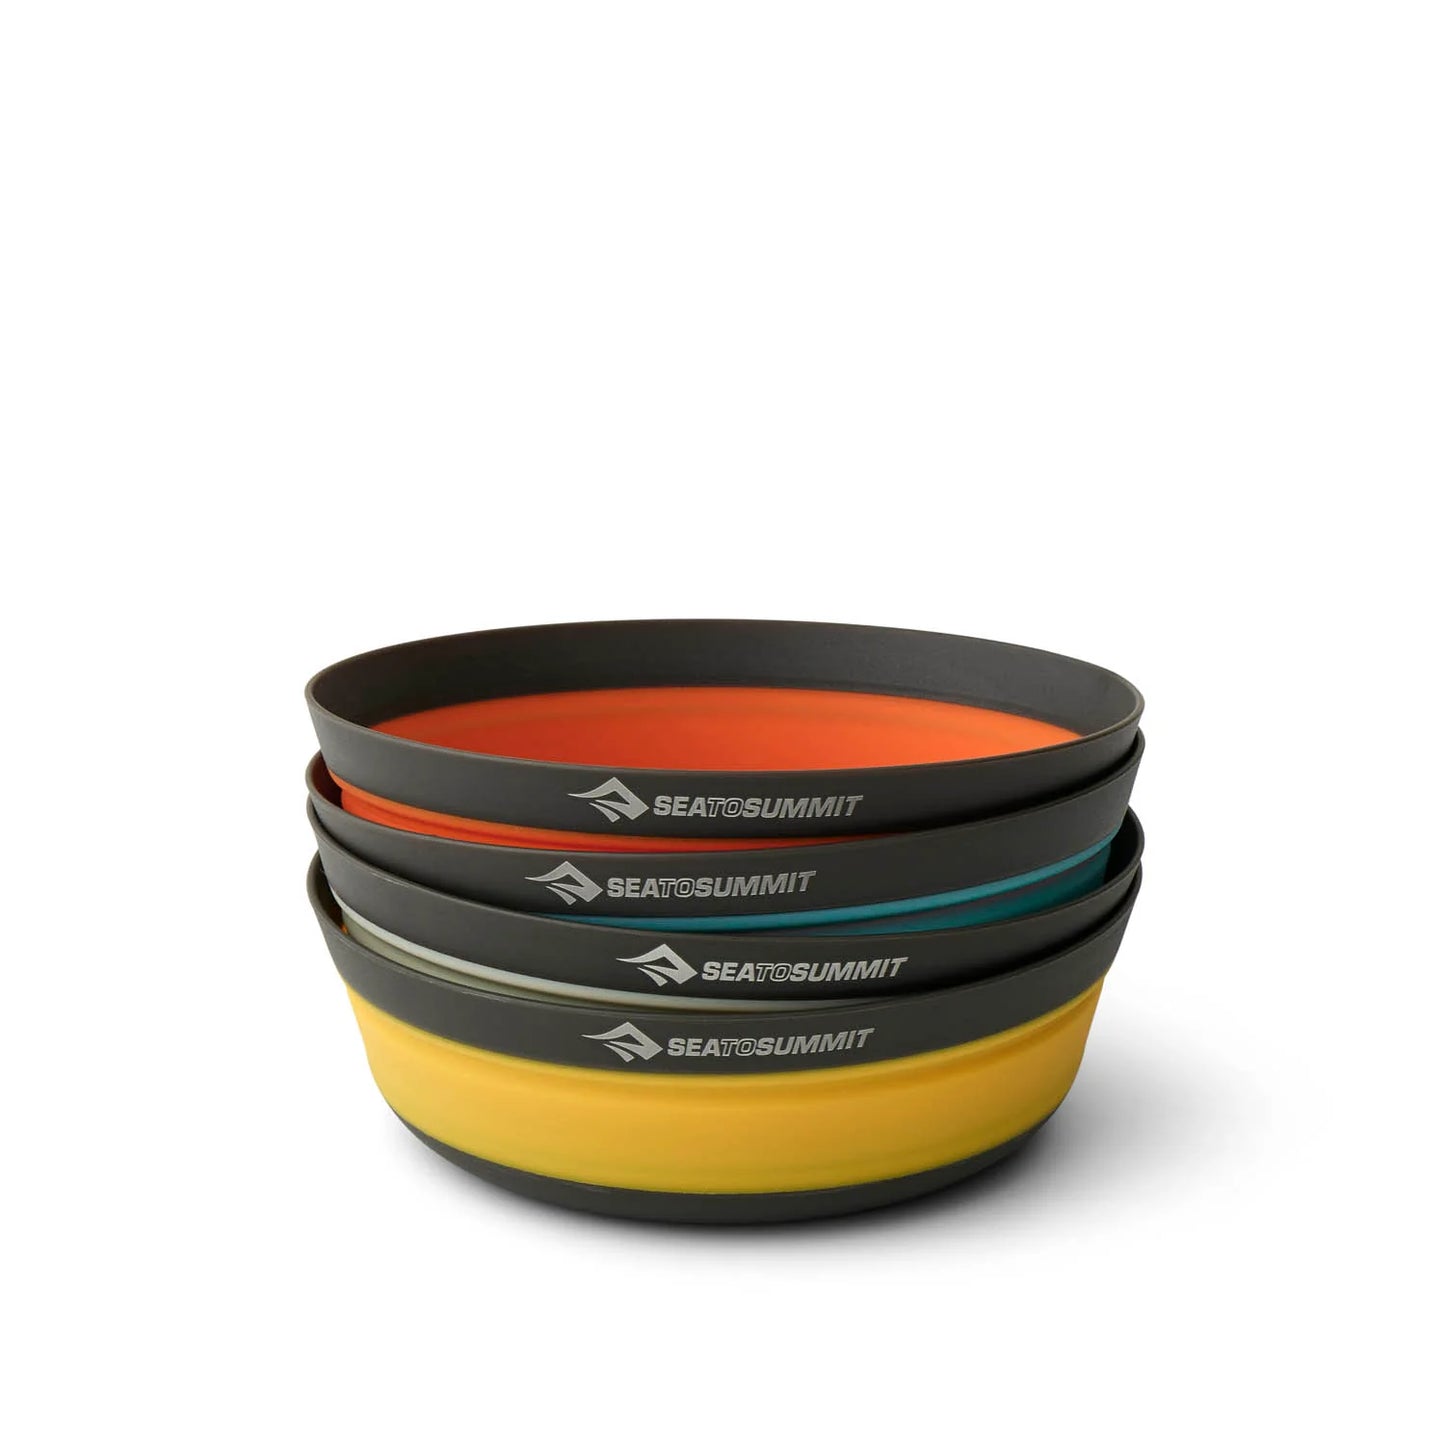 Sea To Summit Frontier UL Collapsible Bowl - L - Yellow